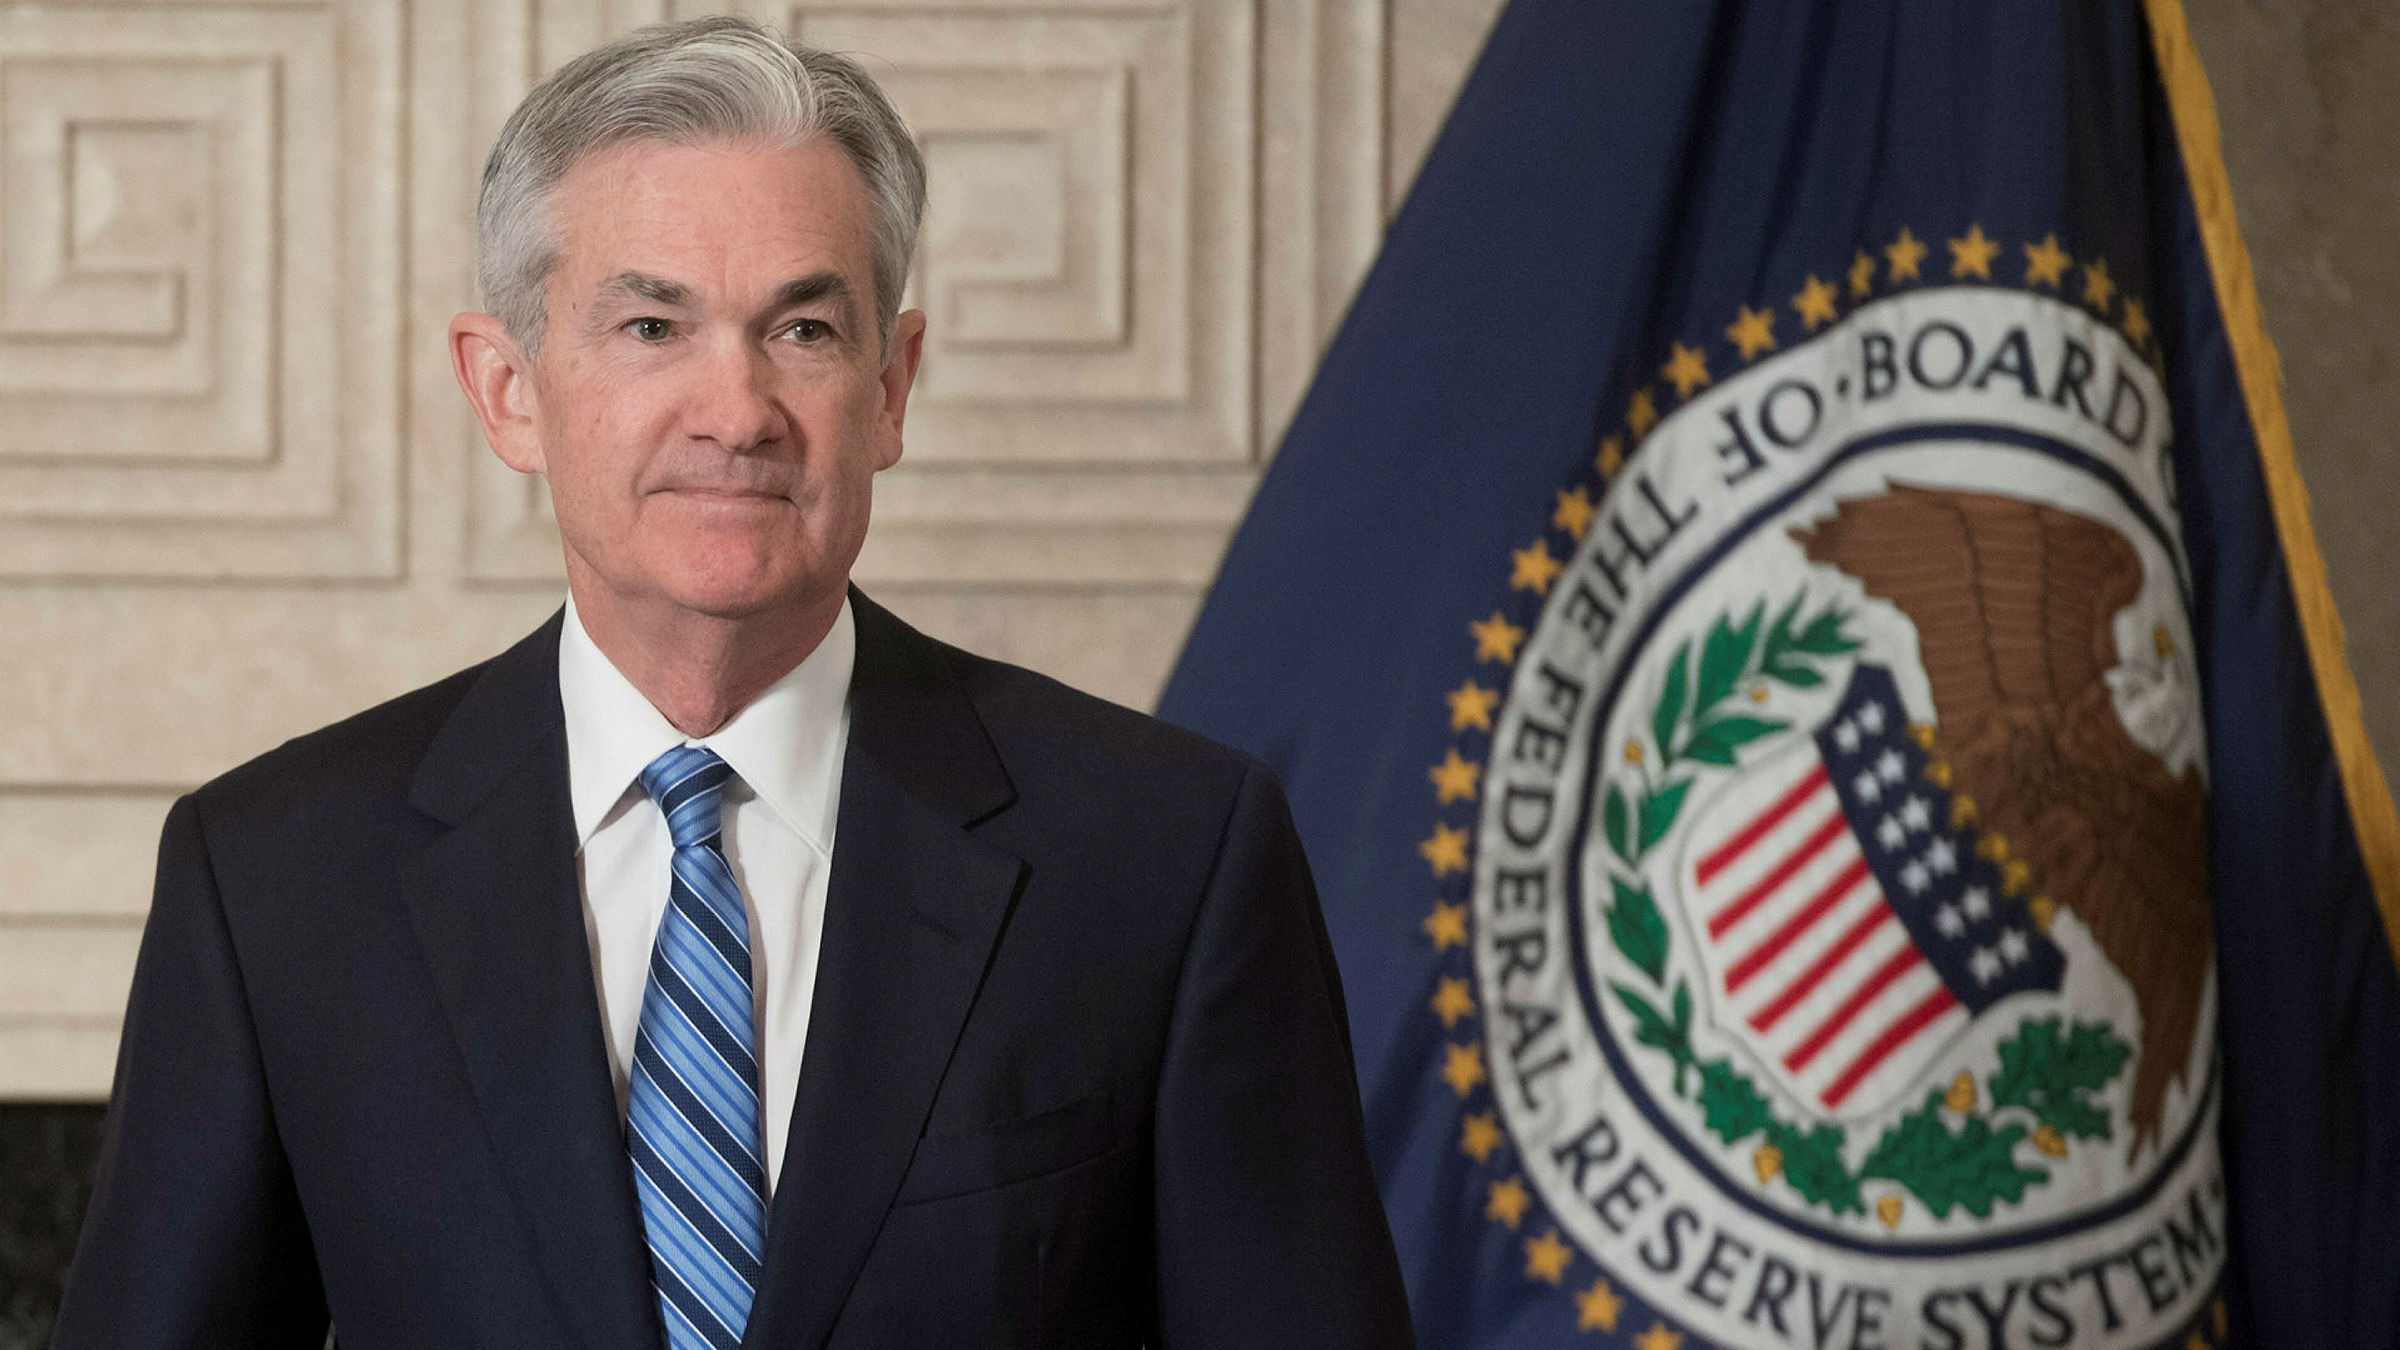 federal reserve implements first half-point interest rate rise since 2000 | financial times